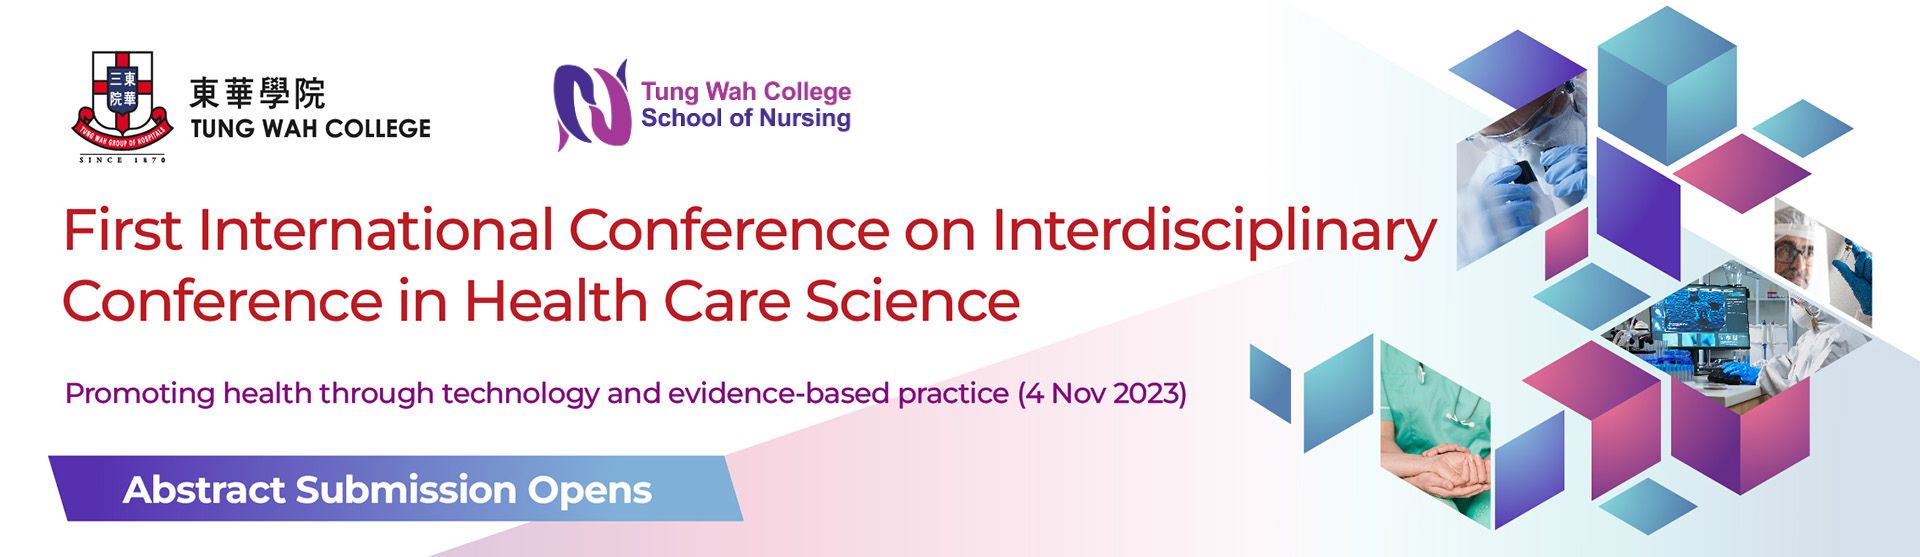 First International Conference on Interdisciplinary Conference in Health Care Science: Promoting health through technology and evidence-based practice